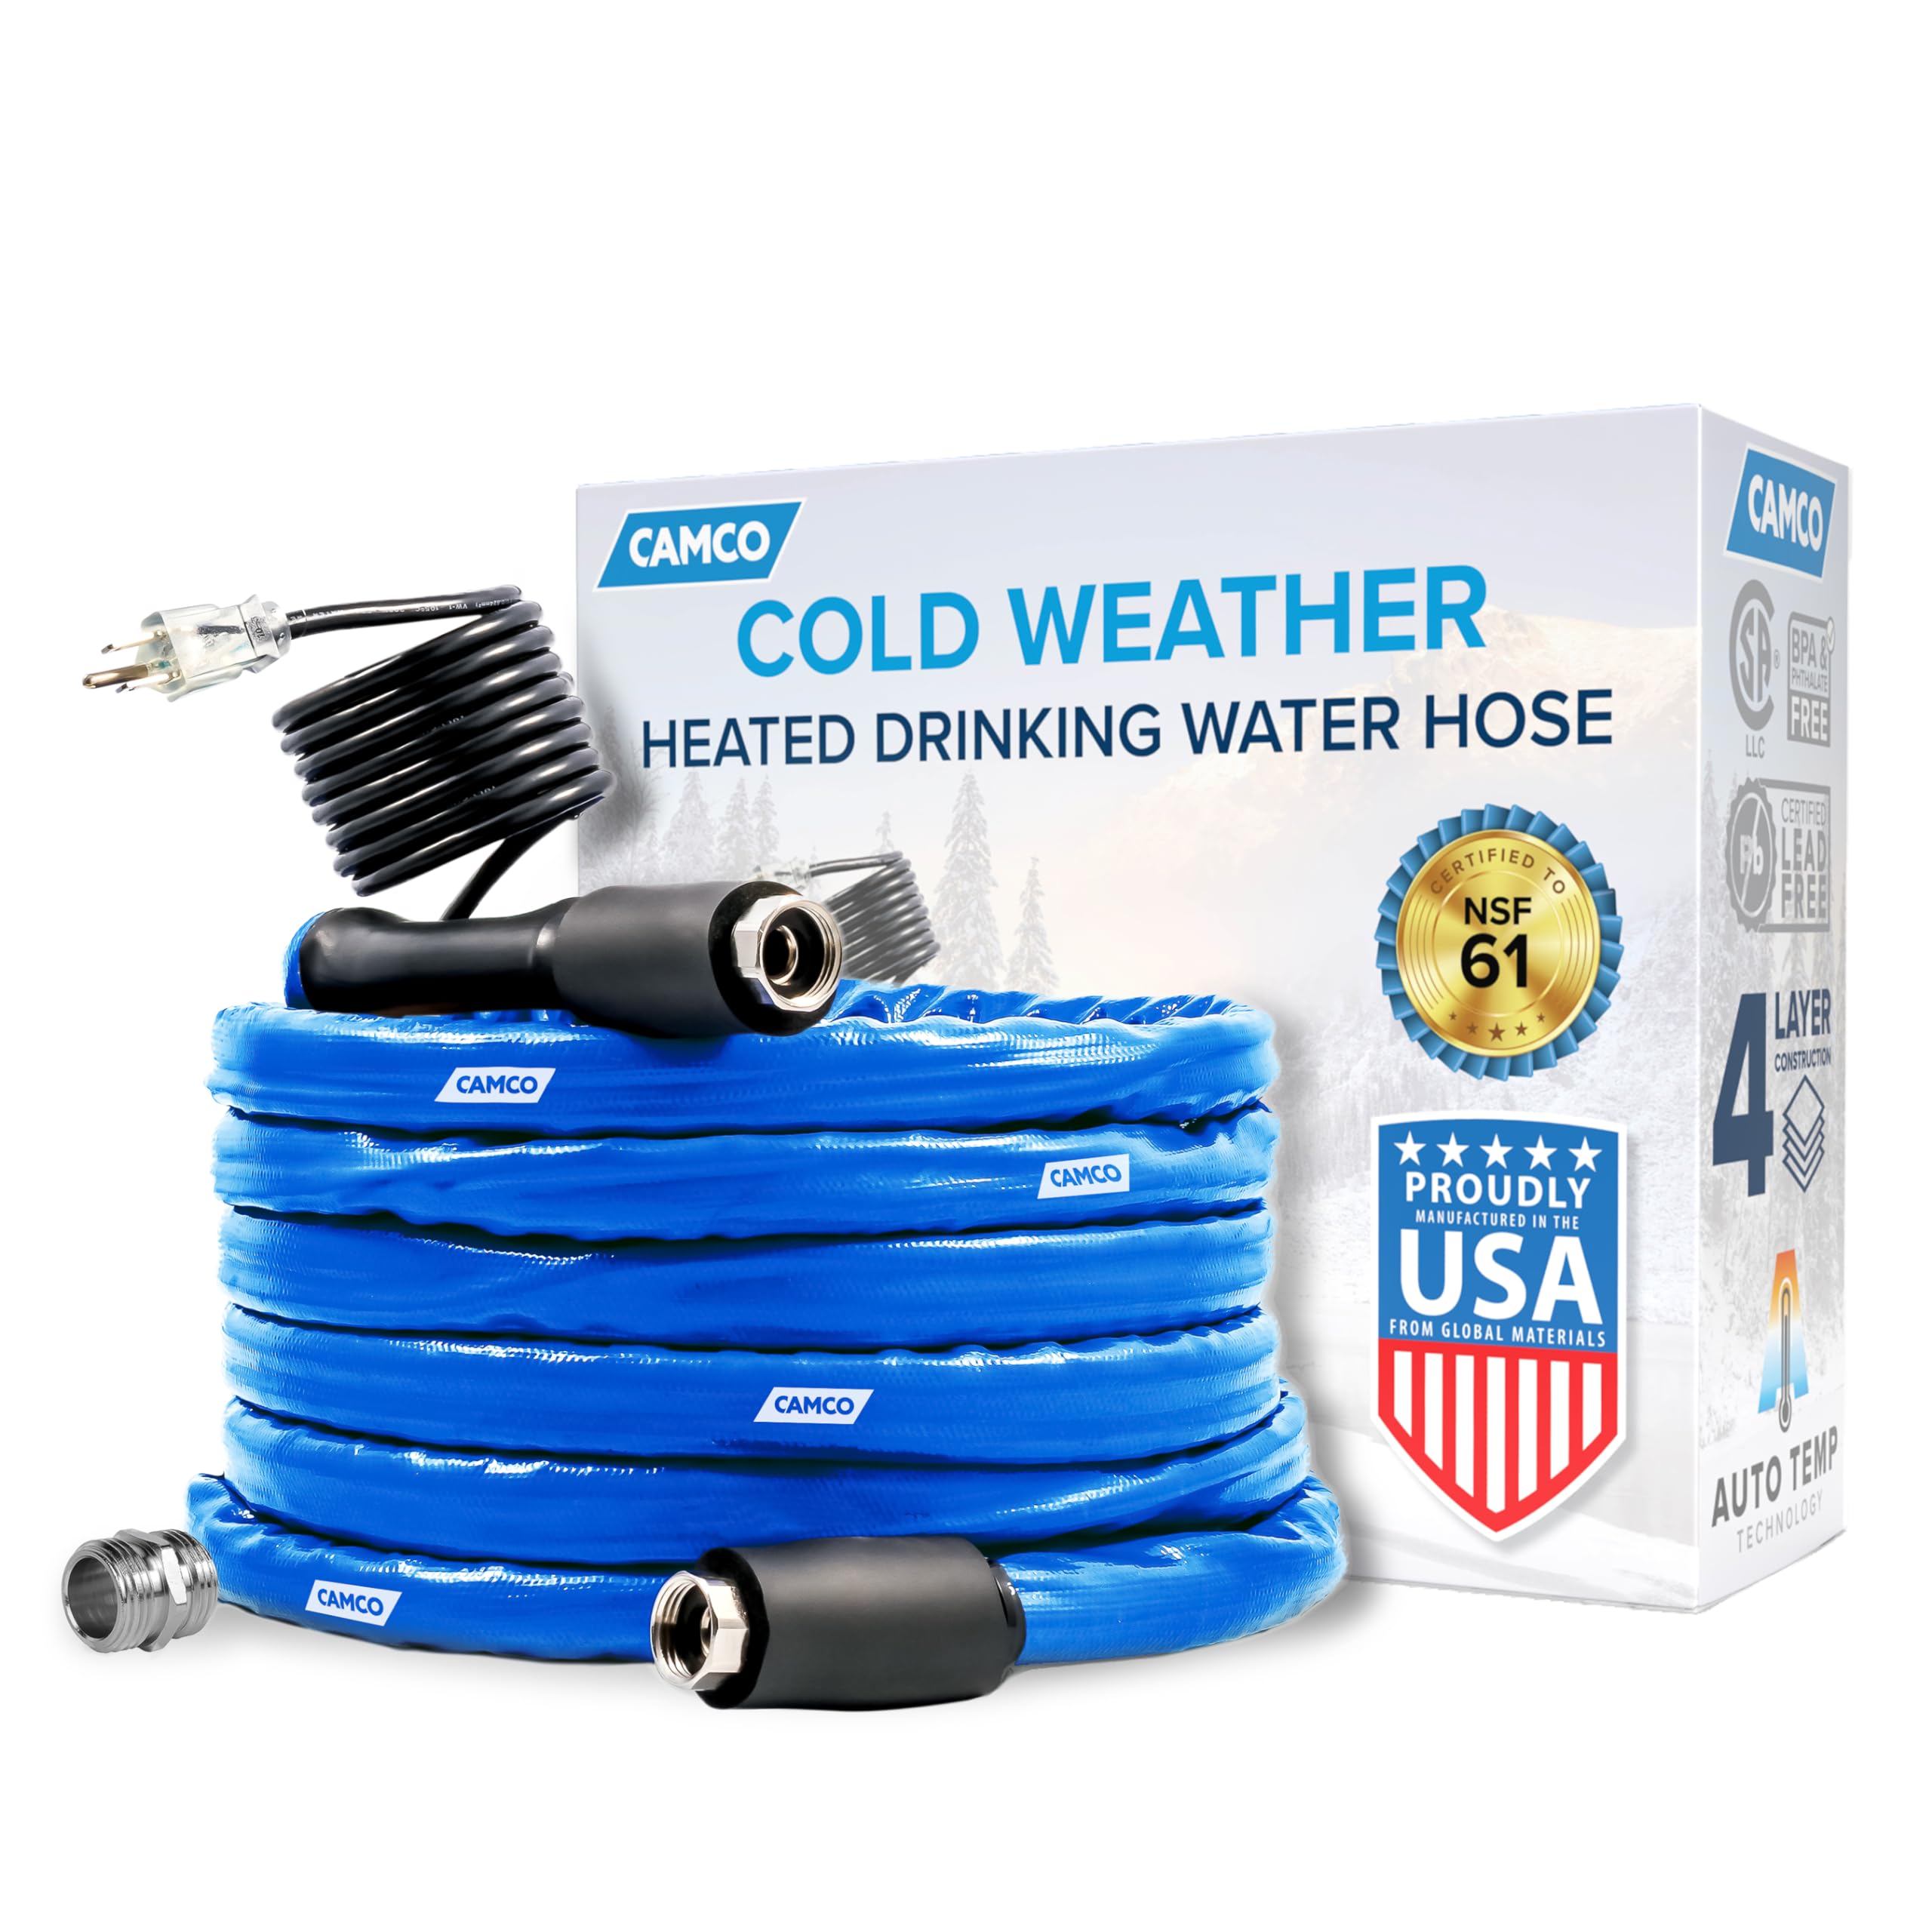 Camco 25-Foot Heated Drinking Water Hose | Features Water Line Freeze Protection Down to -20°F/-28°C & Energy-Saving Thermostat | Includes Adapter for Connection to Either End of Hose (22911)